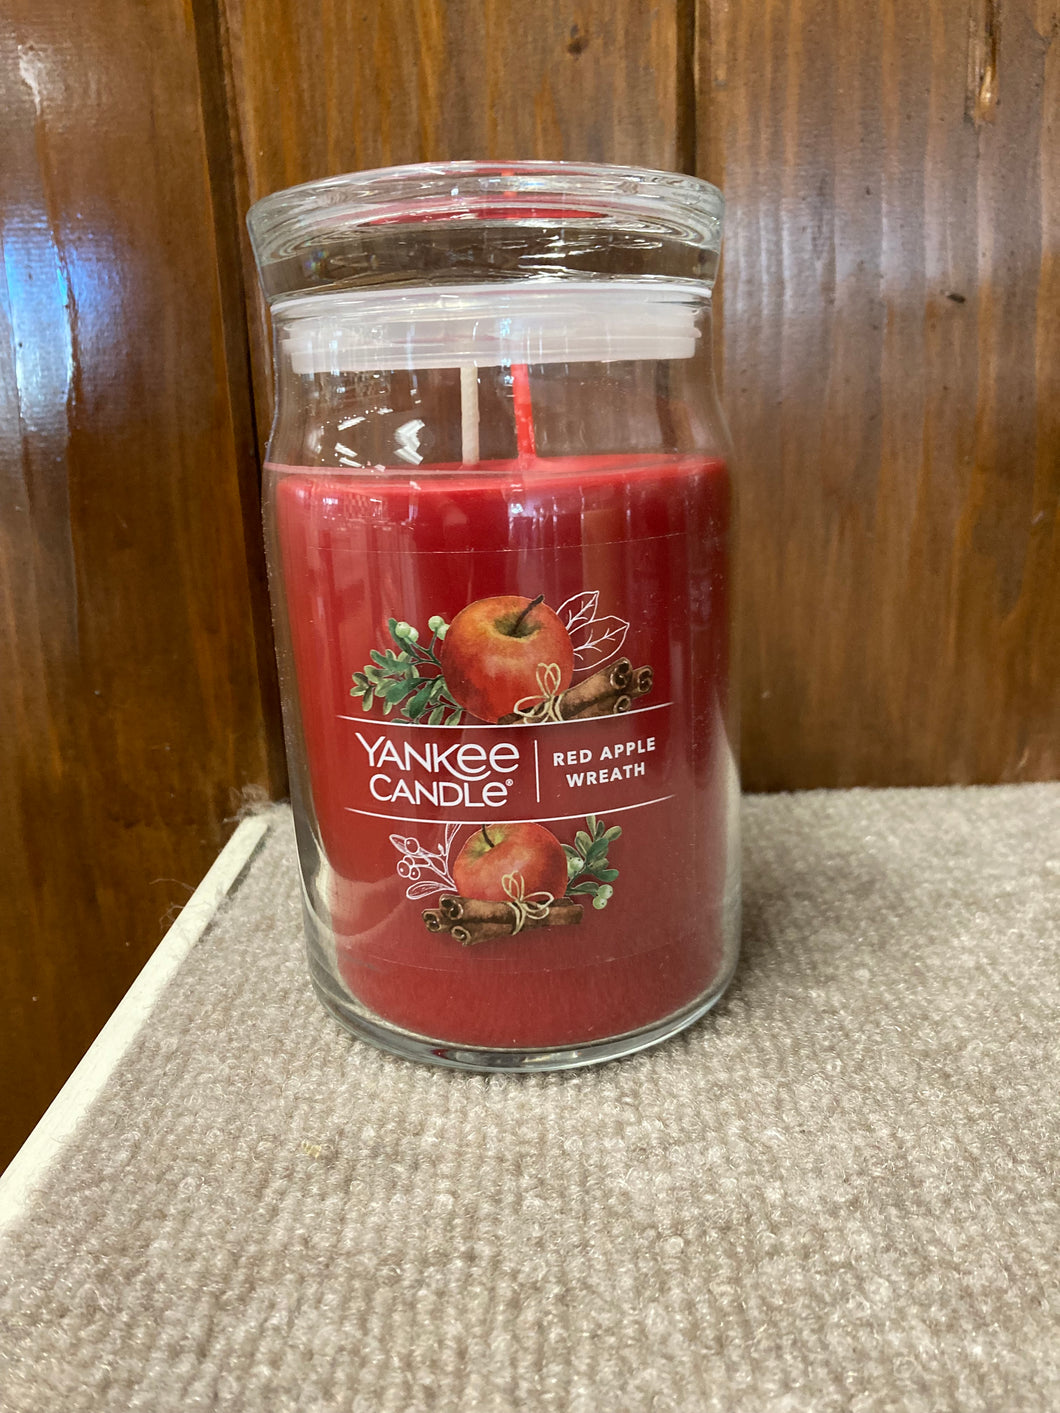 Red Apple Wreath Large Yankee Candle